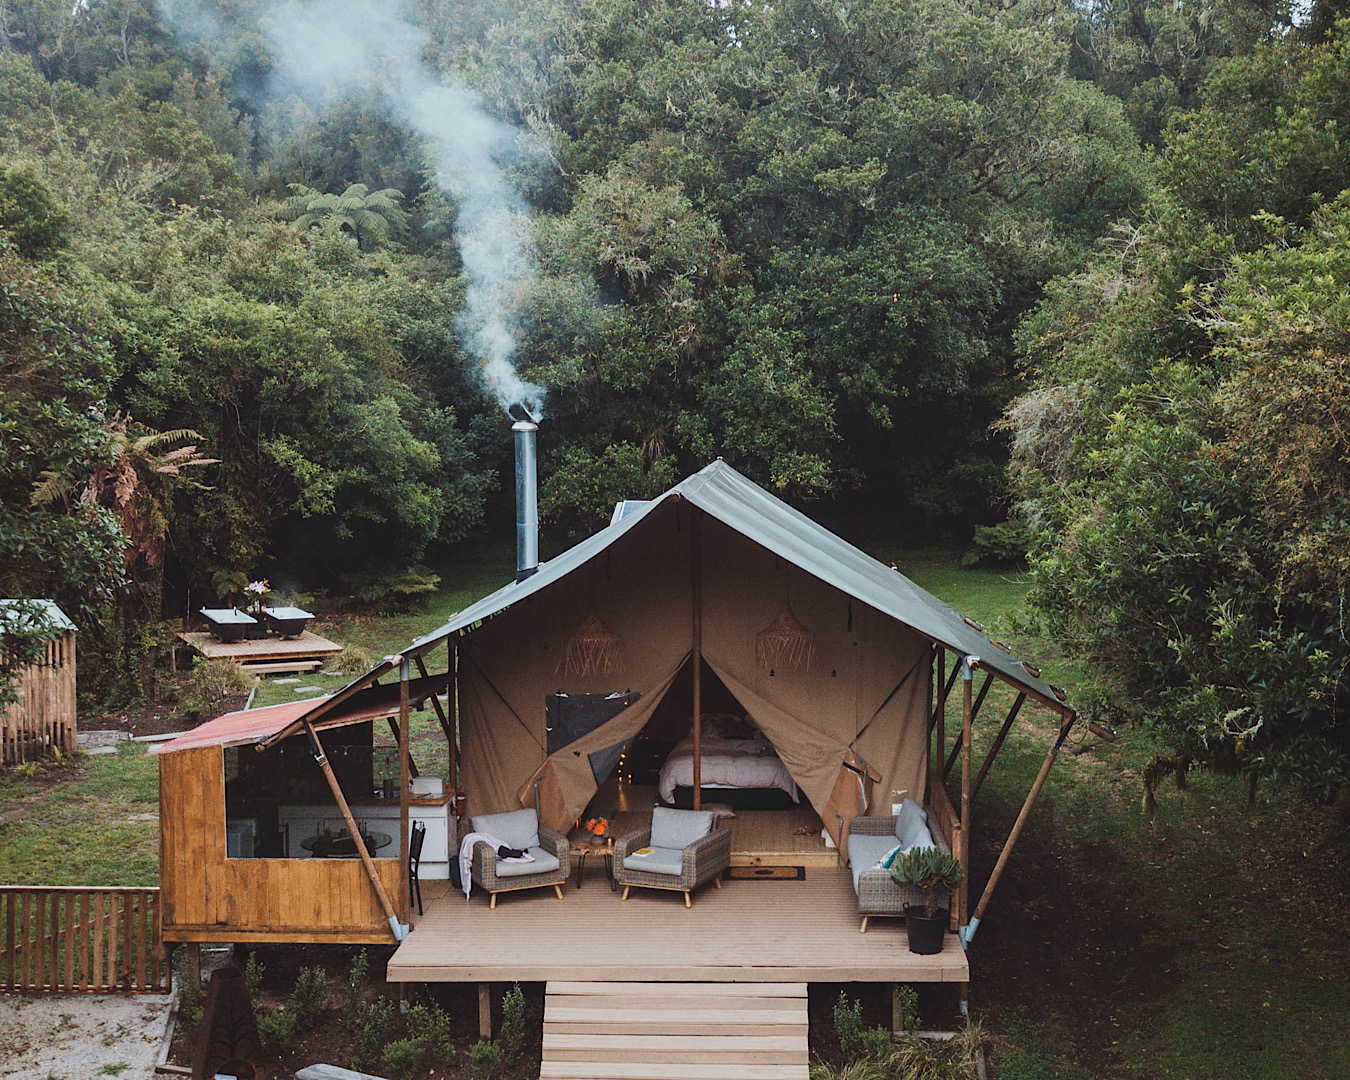 A dreamy glamping cottage set up complete with smoking chimney and twin outdoor baths in the garden. 